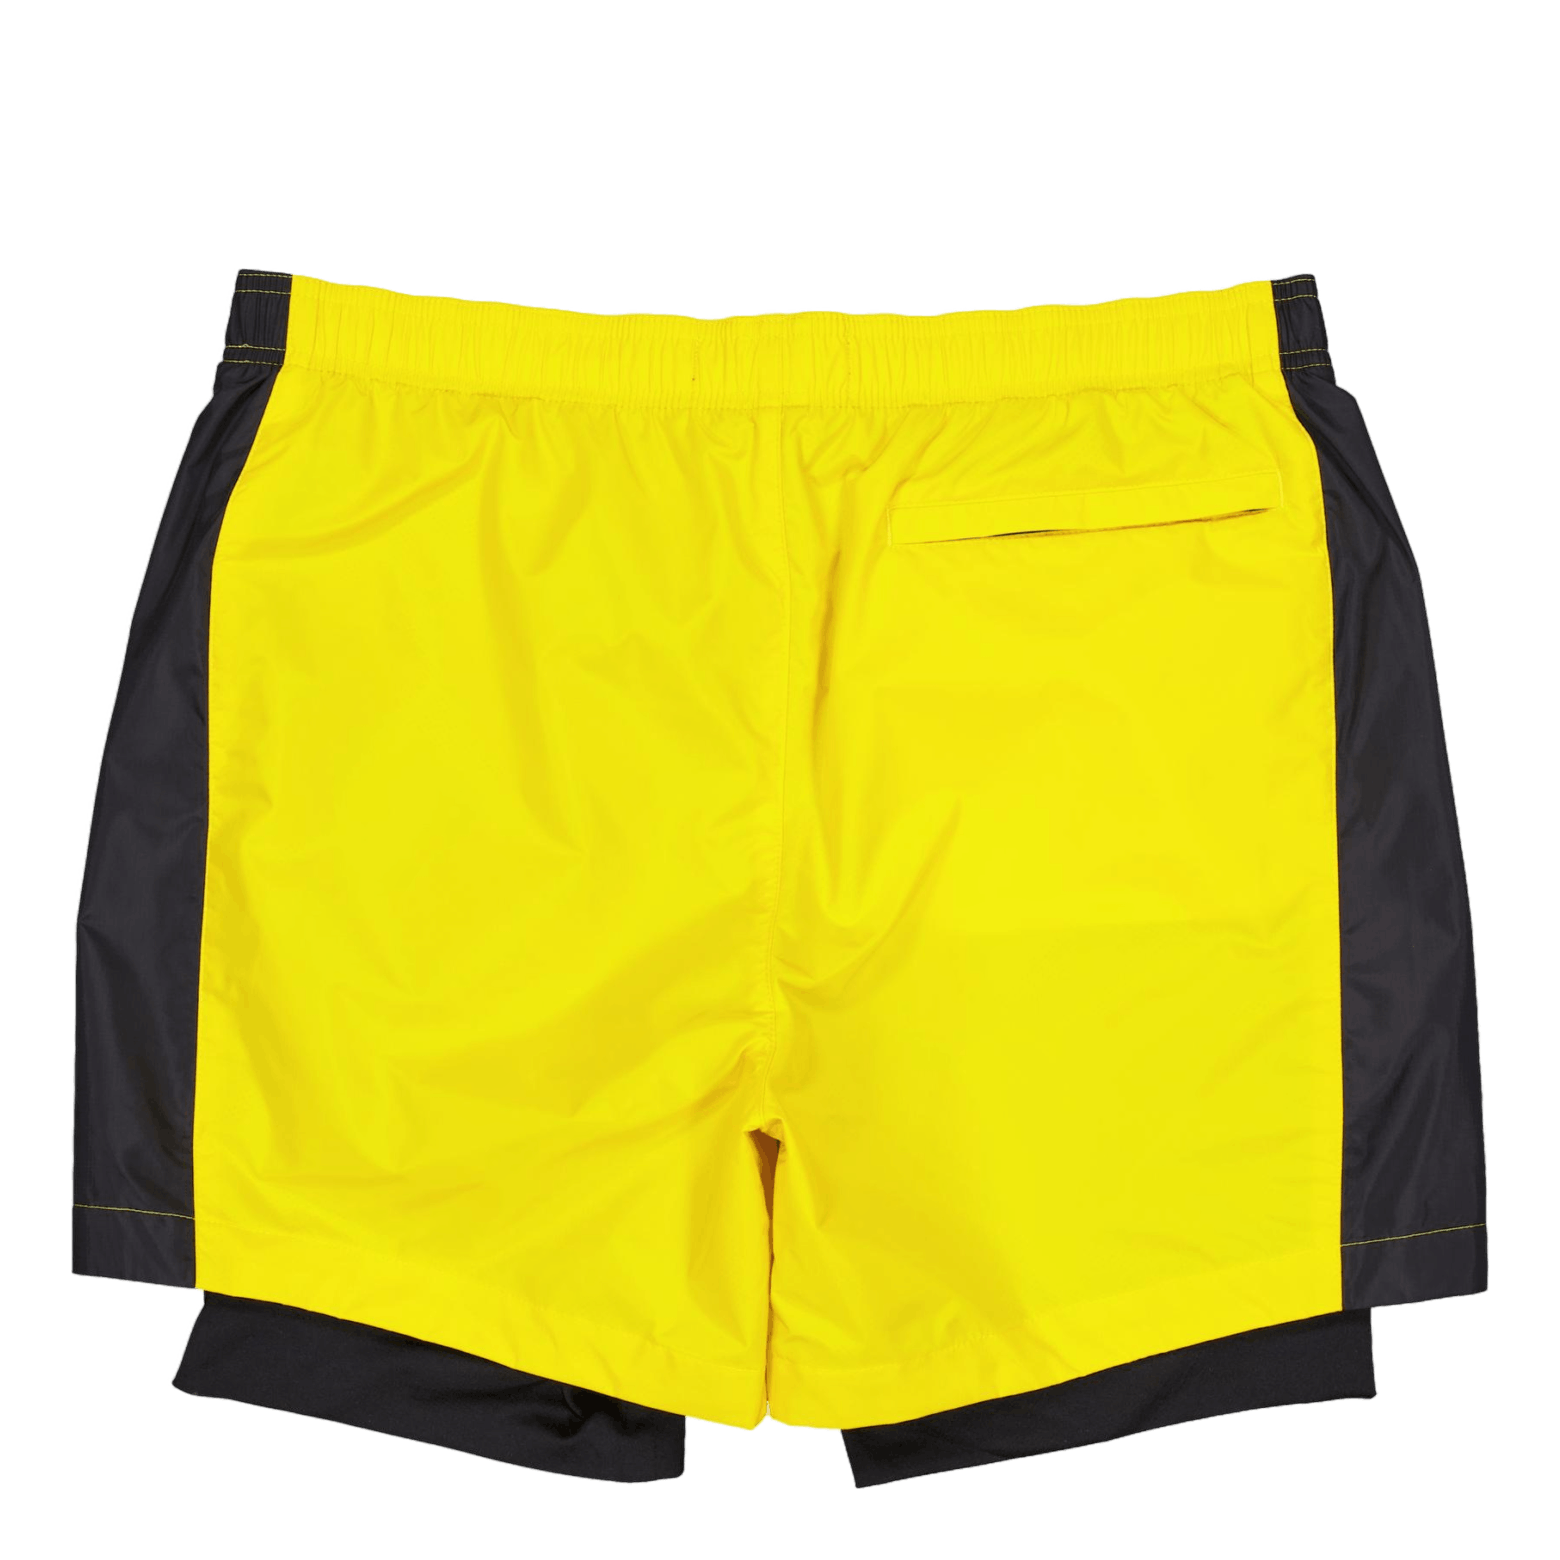 5.25-Inch Polo Sport Short Canary Yllw/Whte/Polo Blck